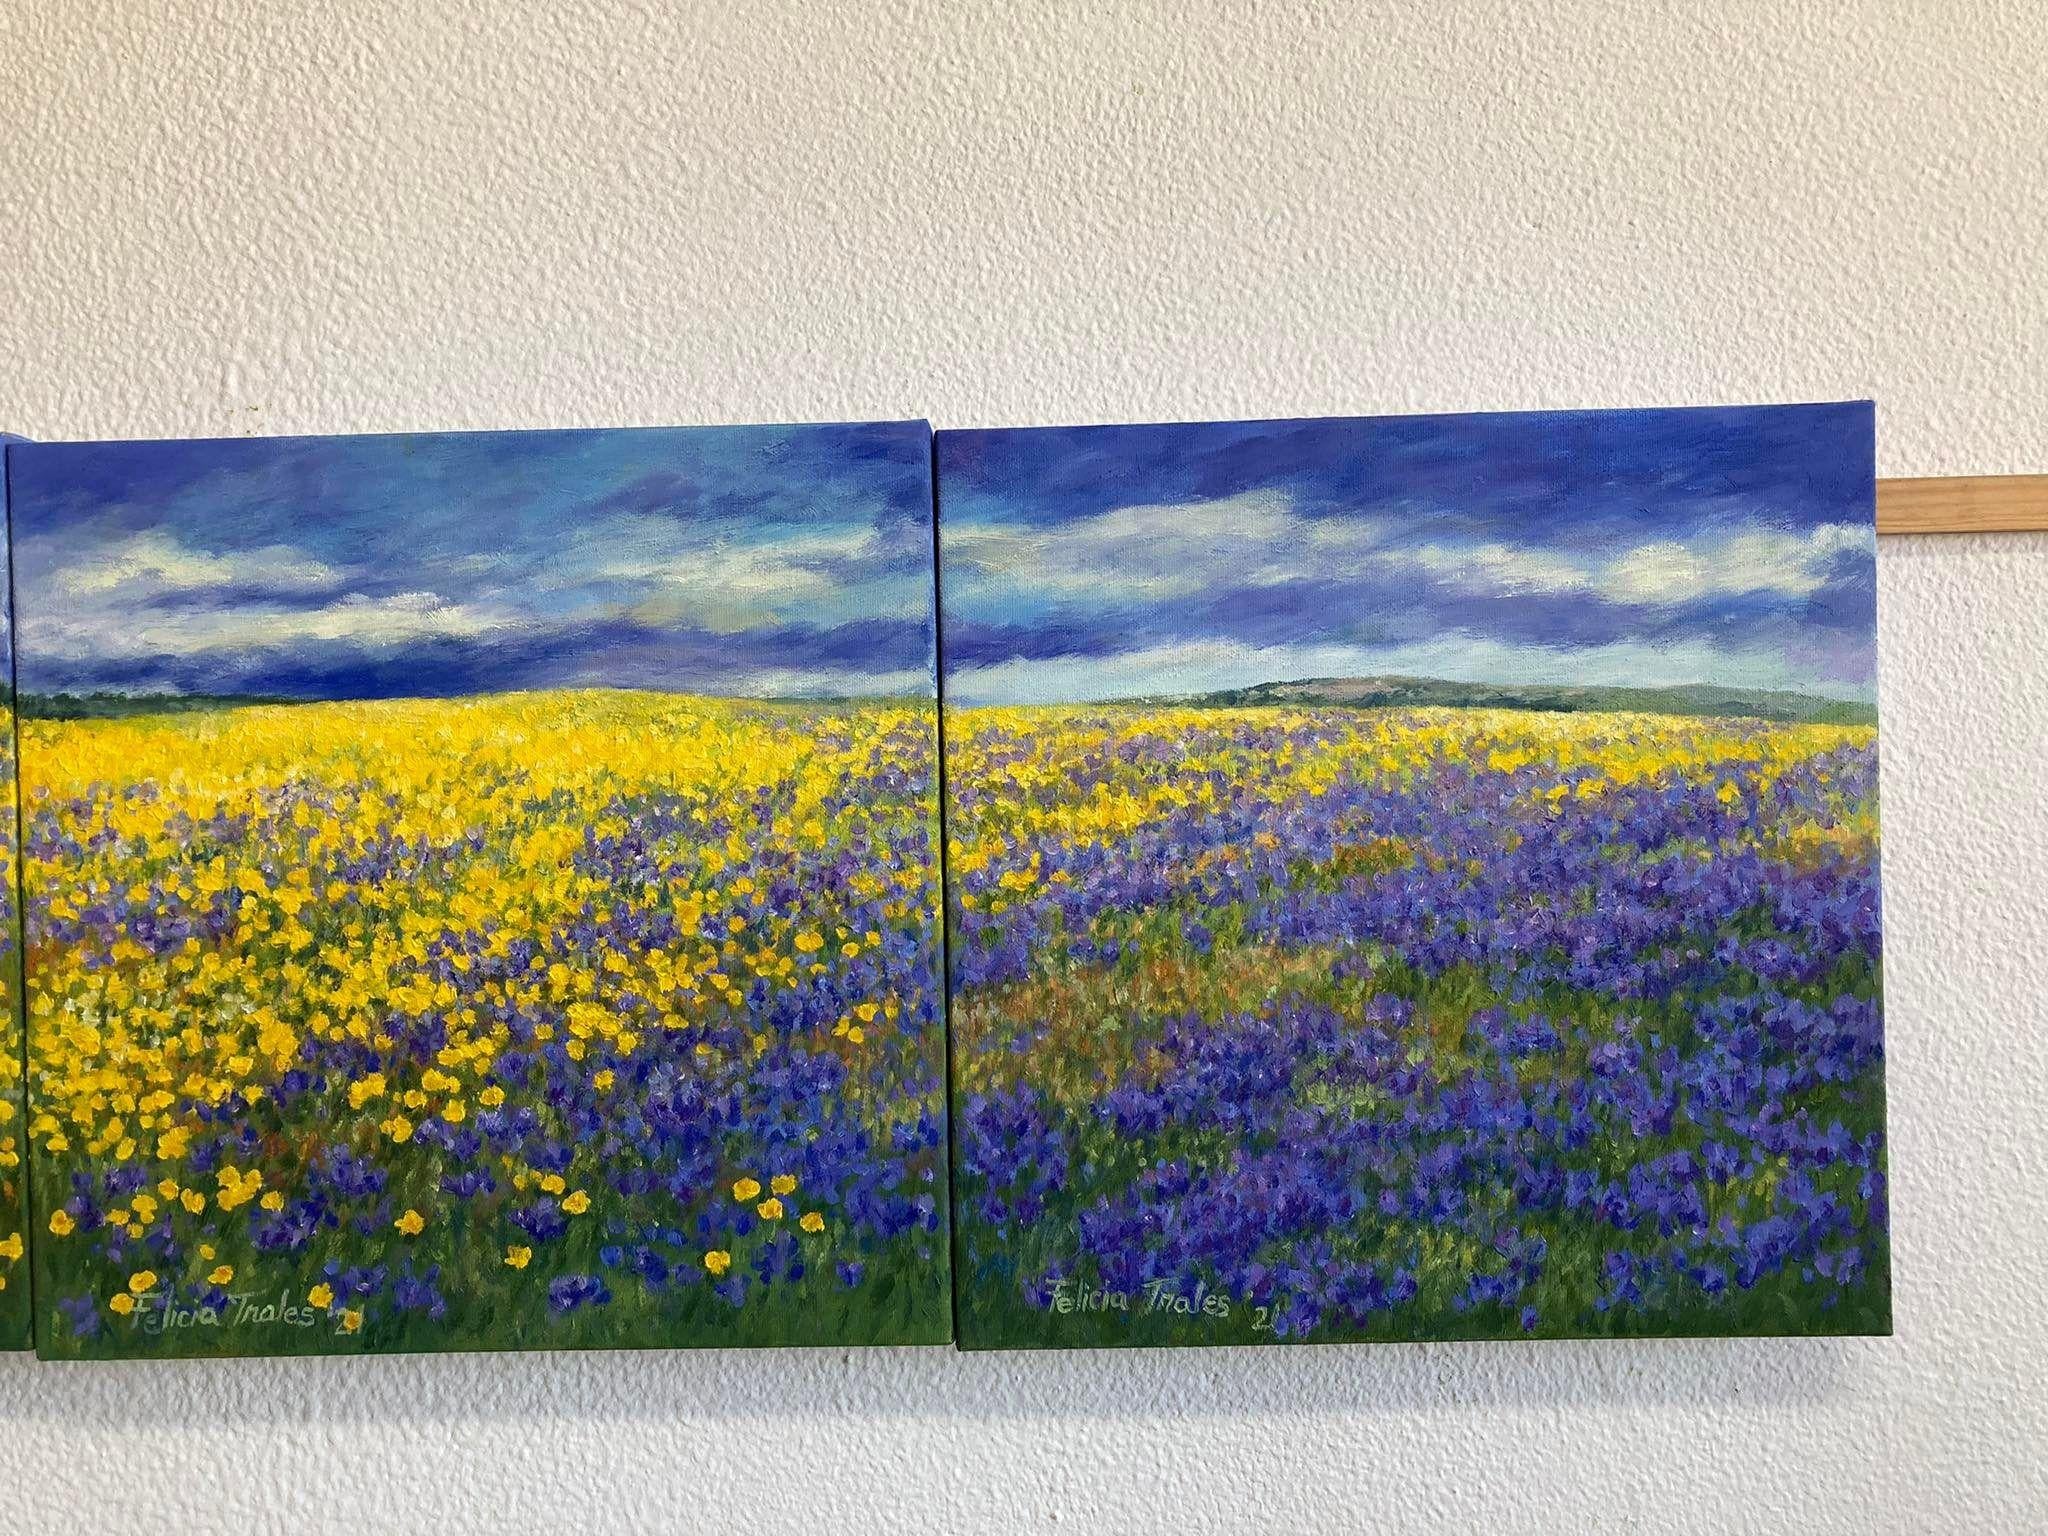 My painting is about spring, spring is about flowers, strong colors and joy :: Painting :: Impressionist :: This piece comes with an official certificate of authenticity signed by the artist :: Ready to Hang: Yes :: Signed: Yes :: Signature